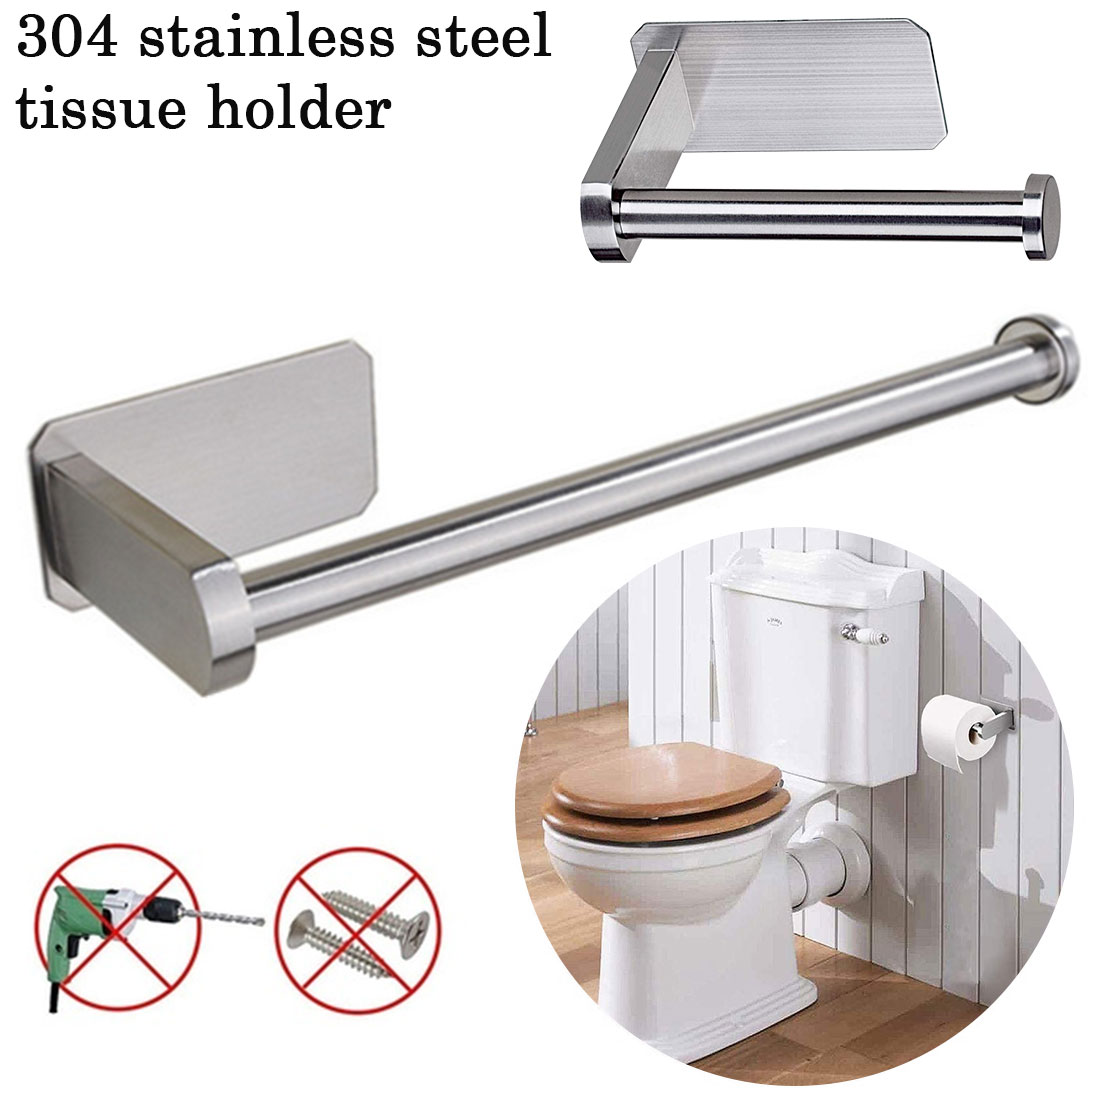 Kitchen Roll Paper Self Adhesive Wall Mount Toilet Paper Holder Stainless Steel Bathroom Tissue Towel Rack 13.8/26.8cm